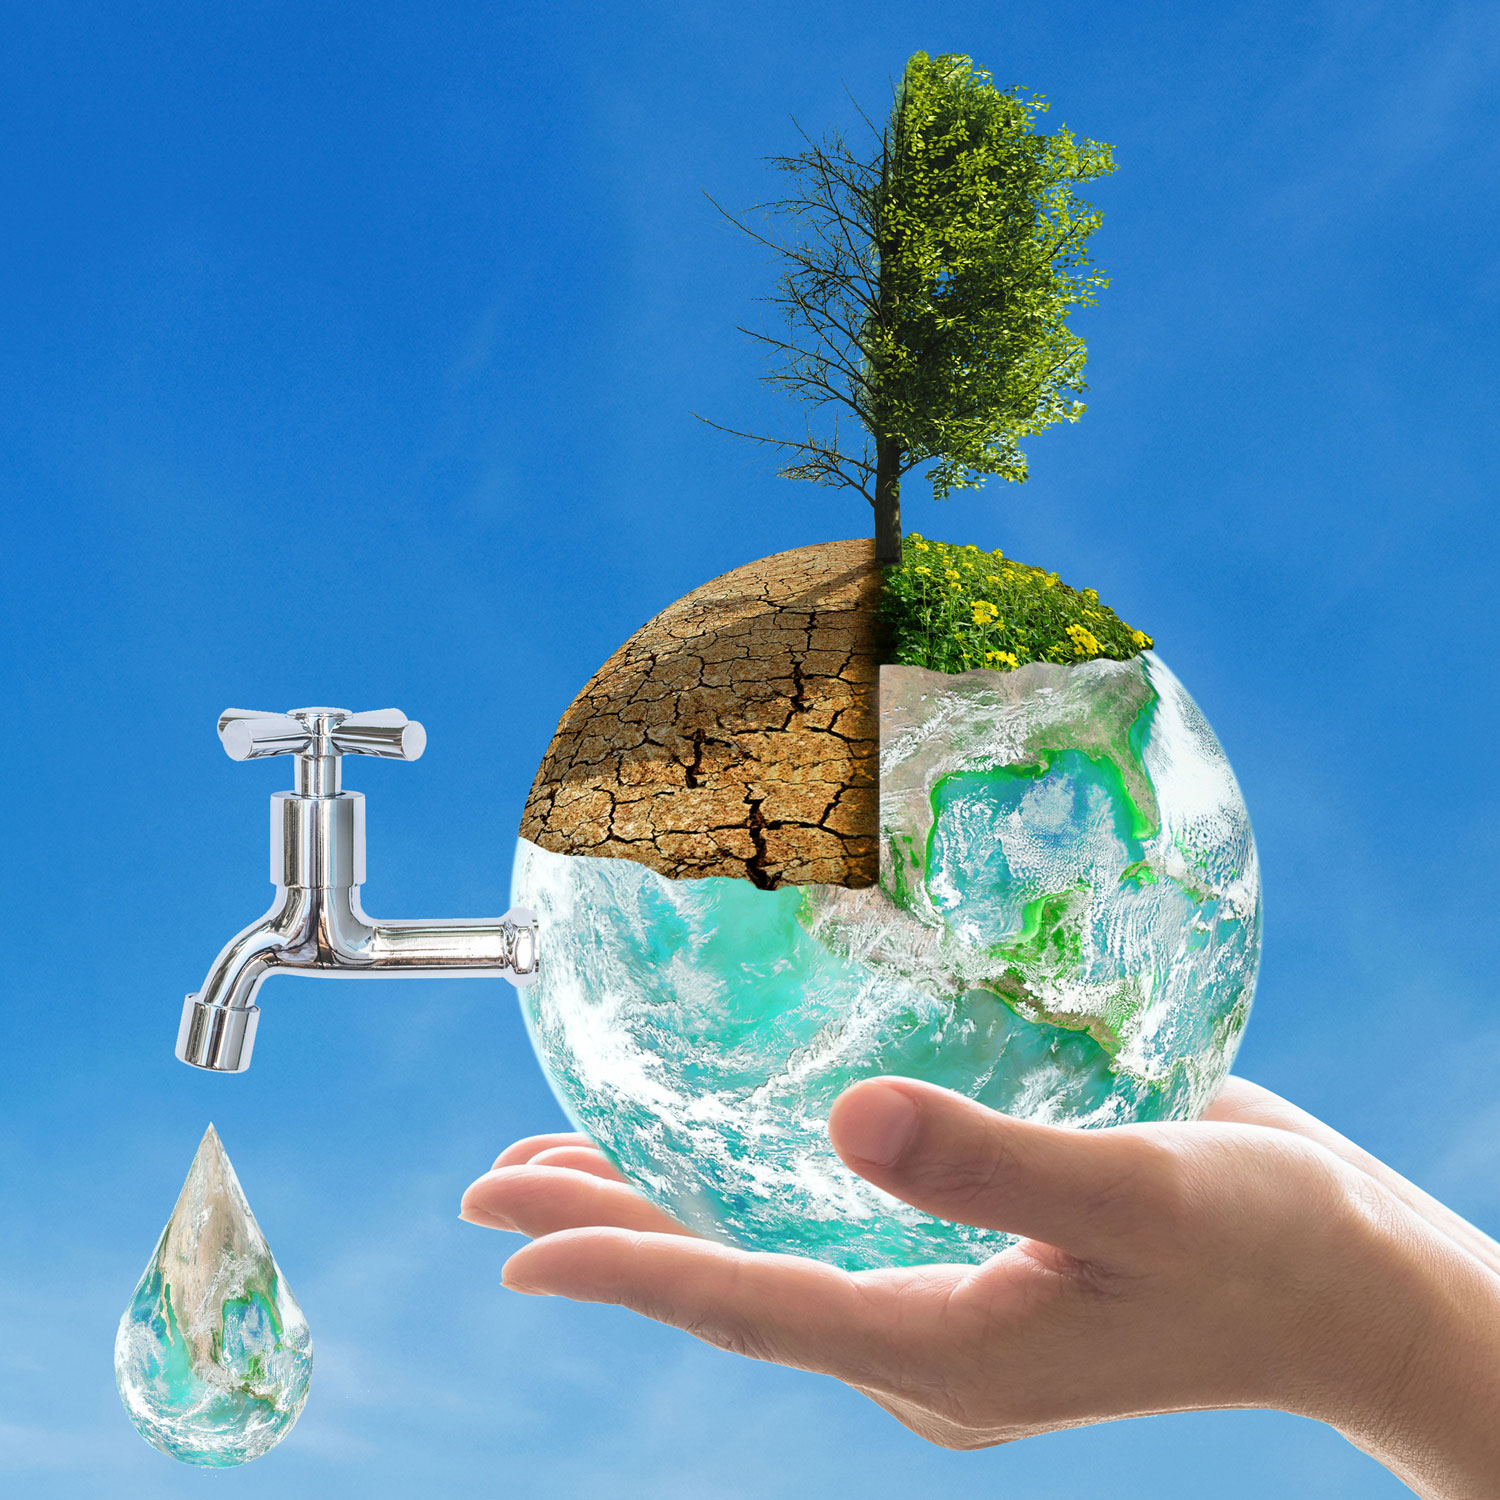 Conserve Water, Conserve Life with Aqualatus - Engage